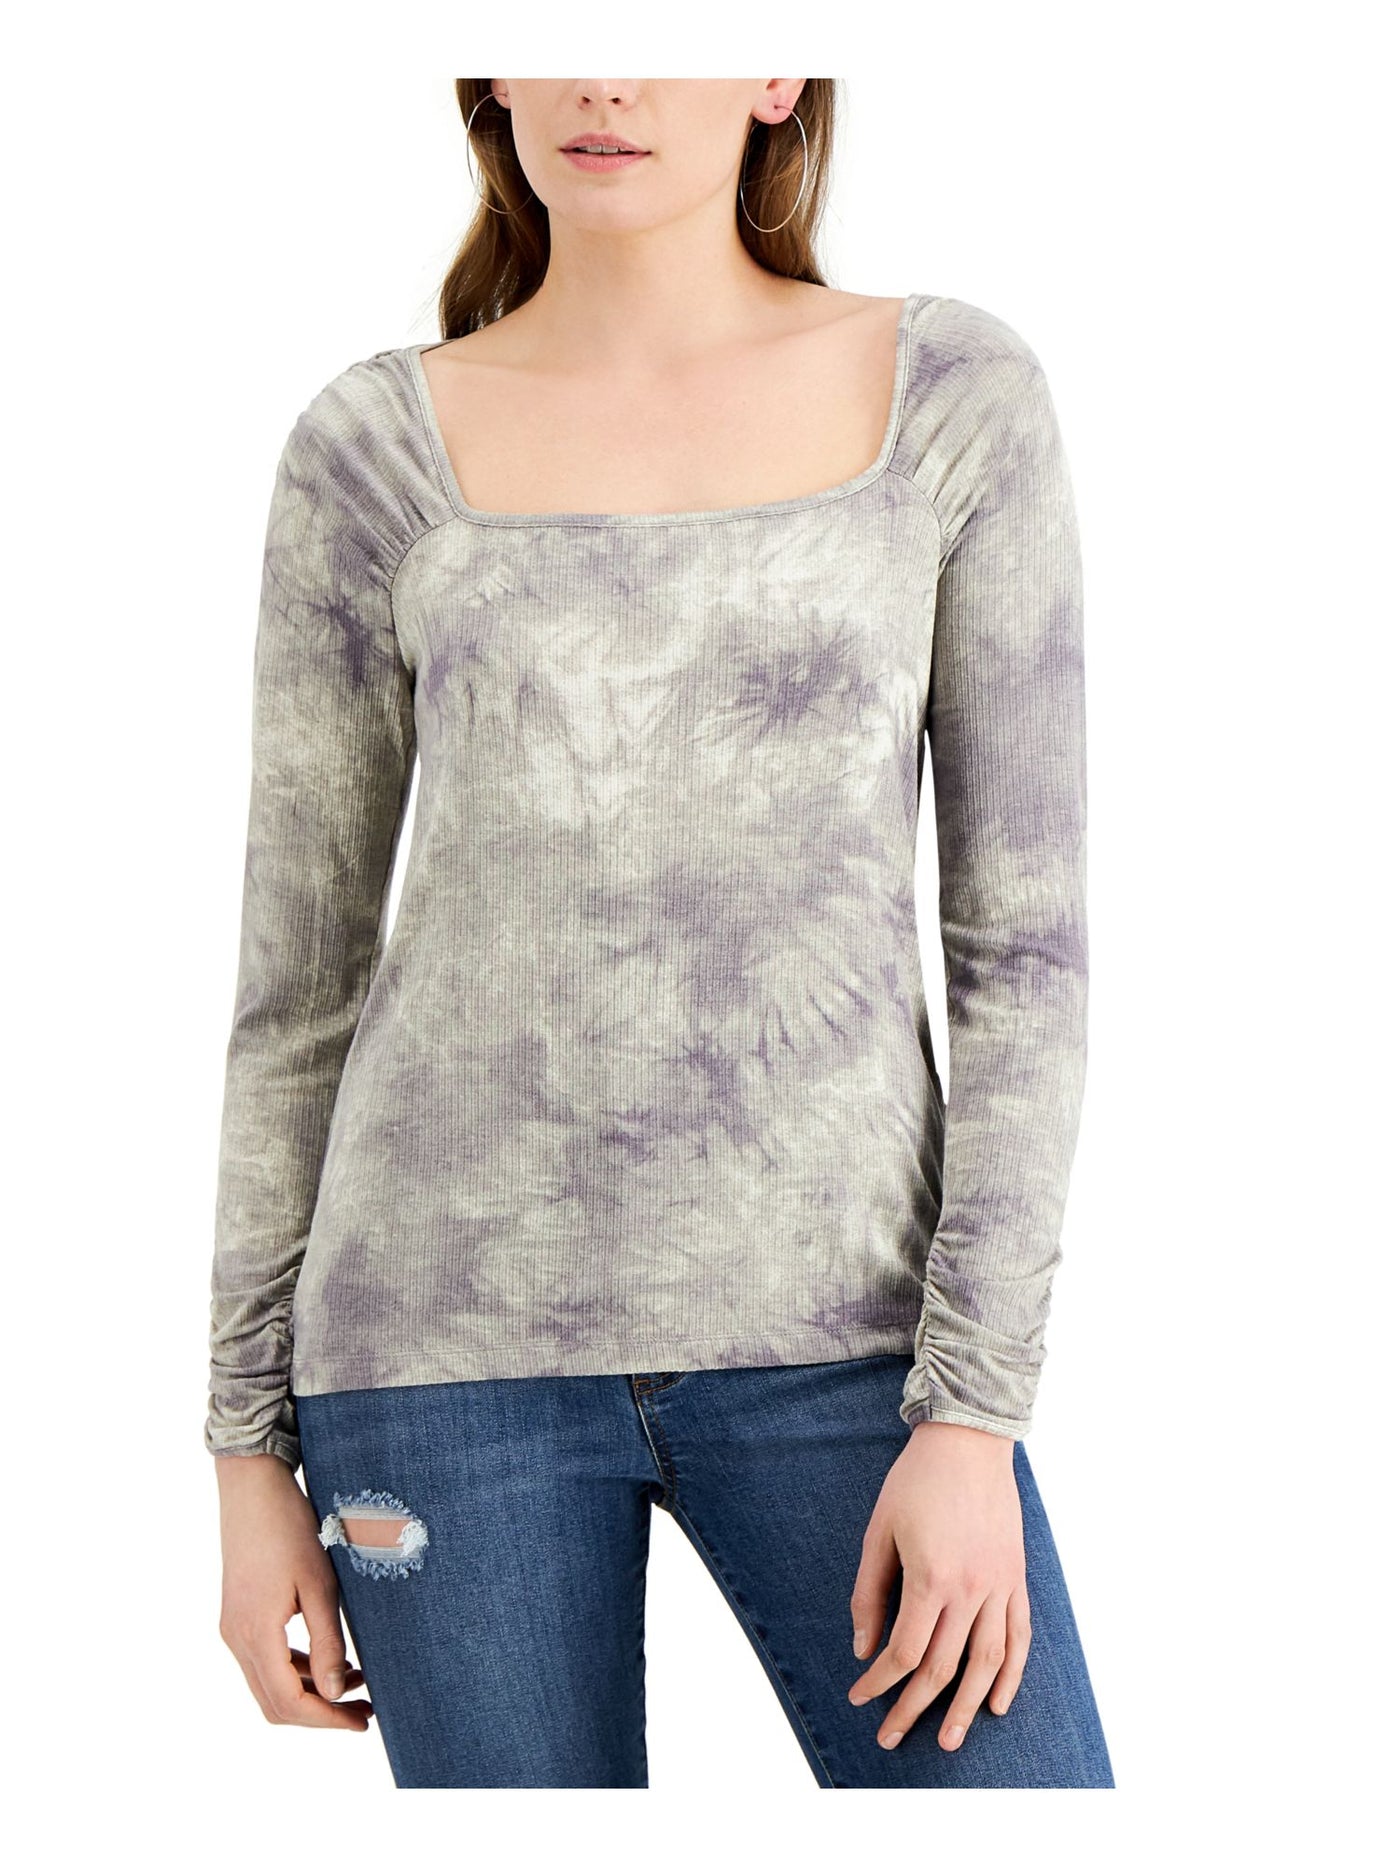 FEVER Womens Gray Tie Dye Long Sleeve Square Neck Top Size: S